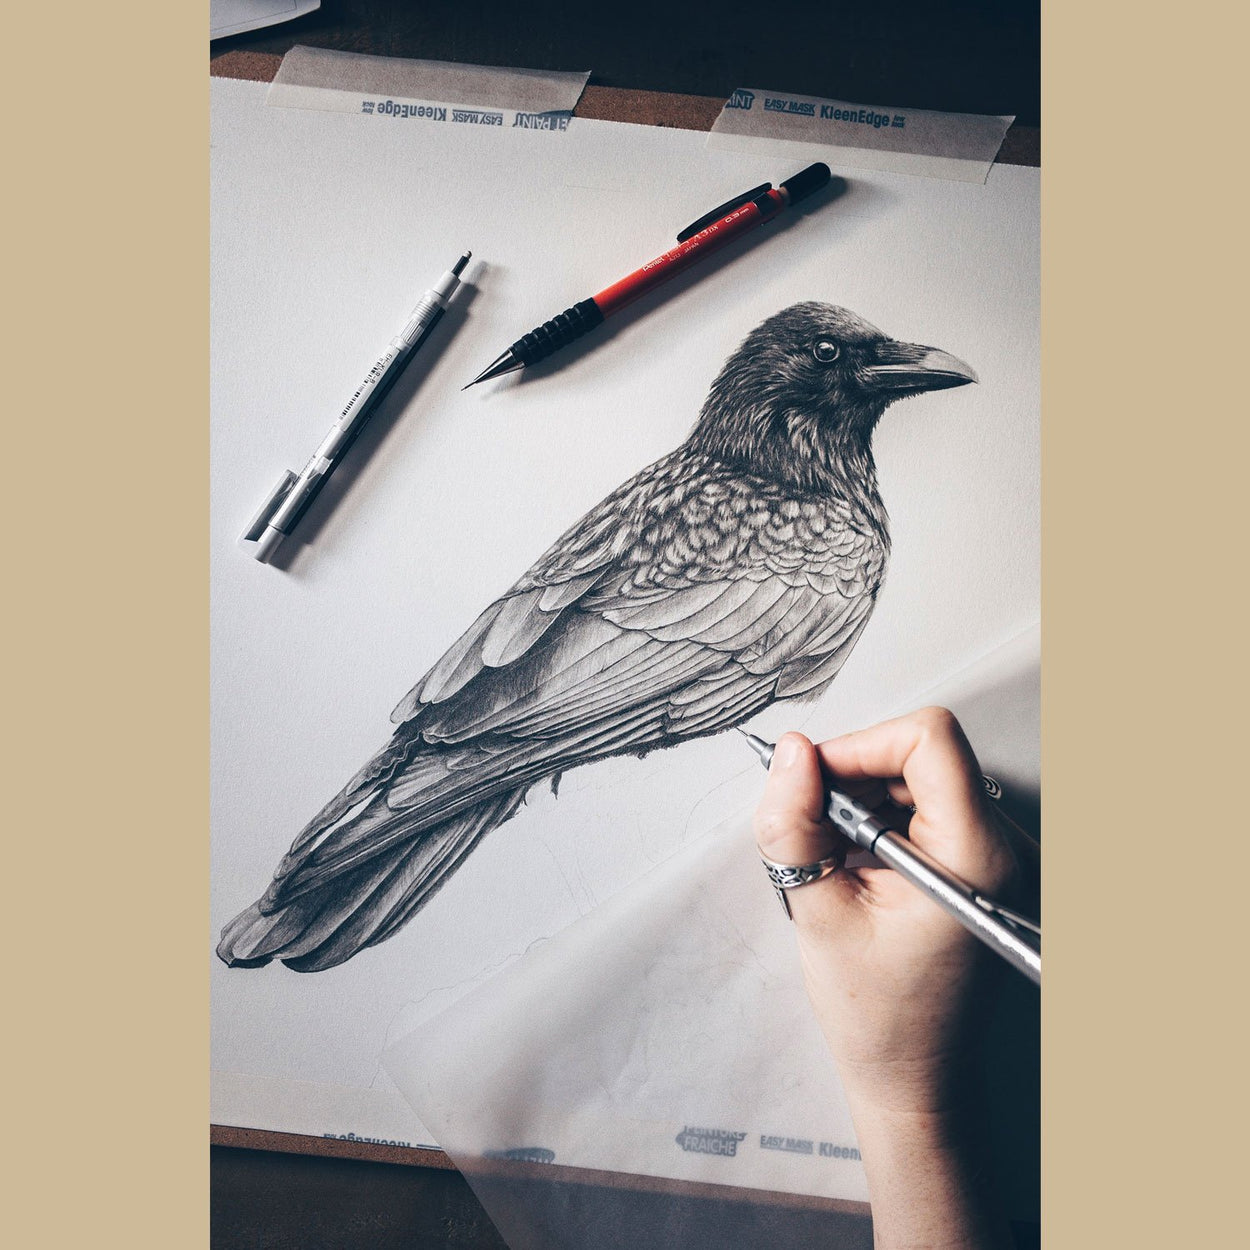 Crow Drawing In Progress - The Thriving Wild